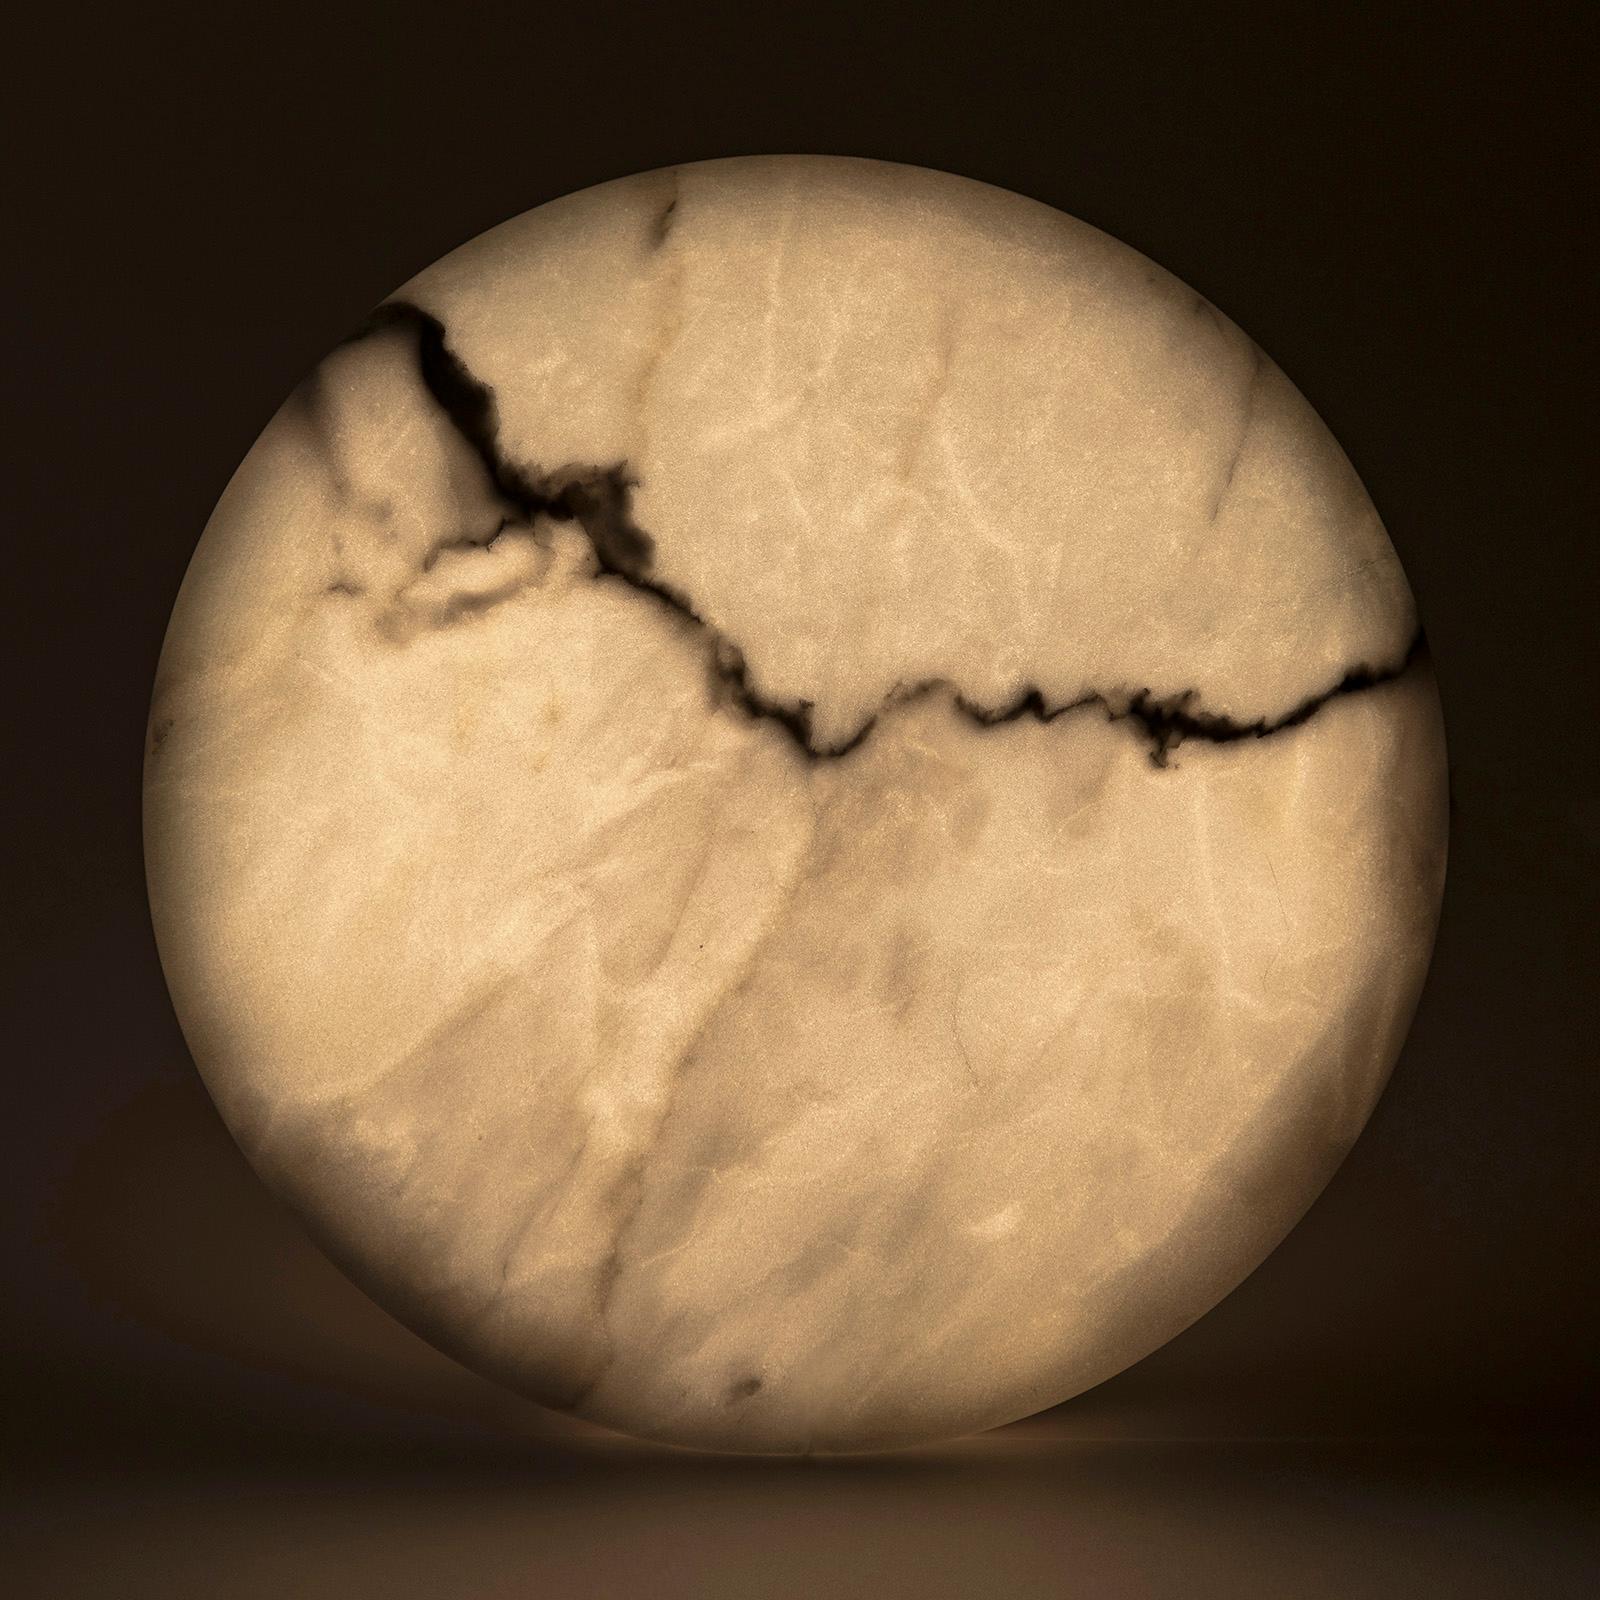 A lamp with a non-homogeneous elegance, thanks to the rough and porous texture that covers the surface. The reference to the image of the moon is immediate, a mysterious and seductive celestial object, accurate and indefinite at the same time.
The